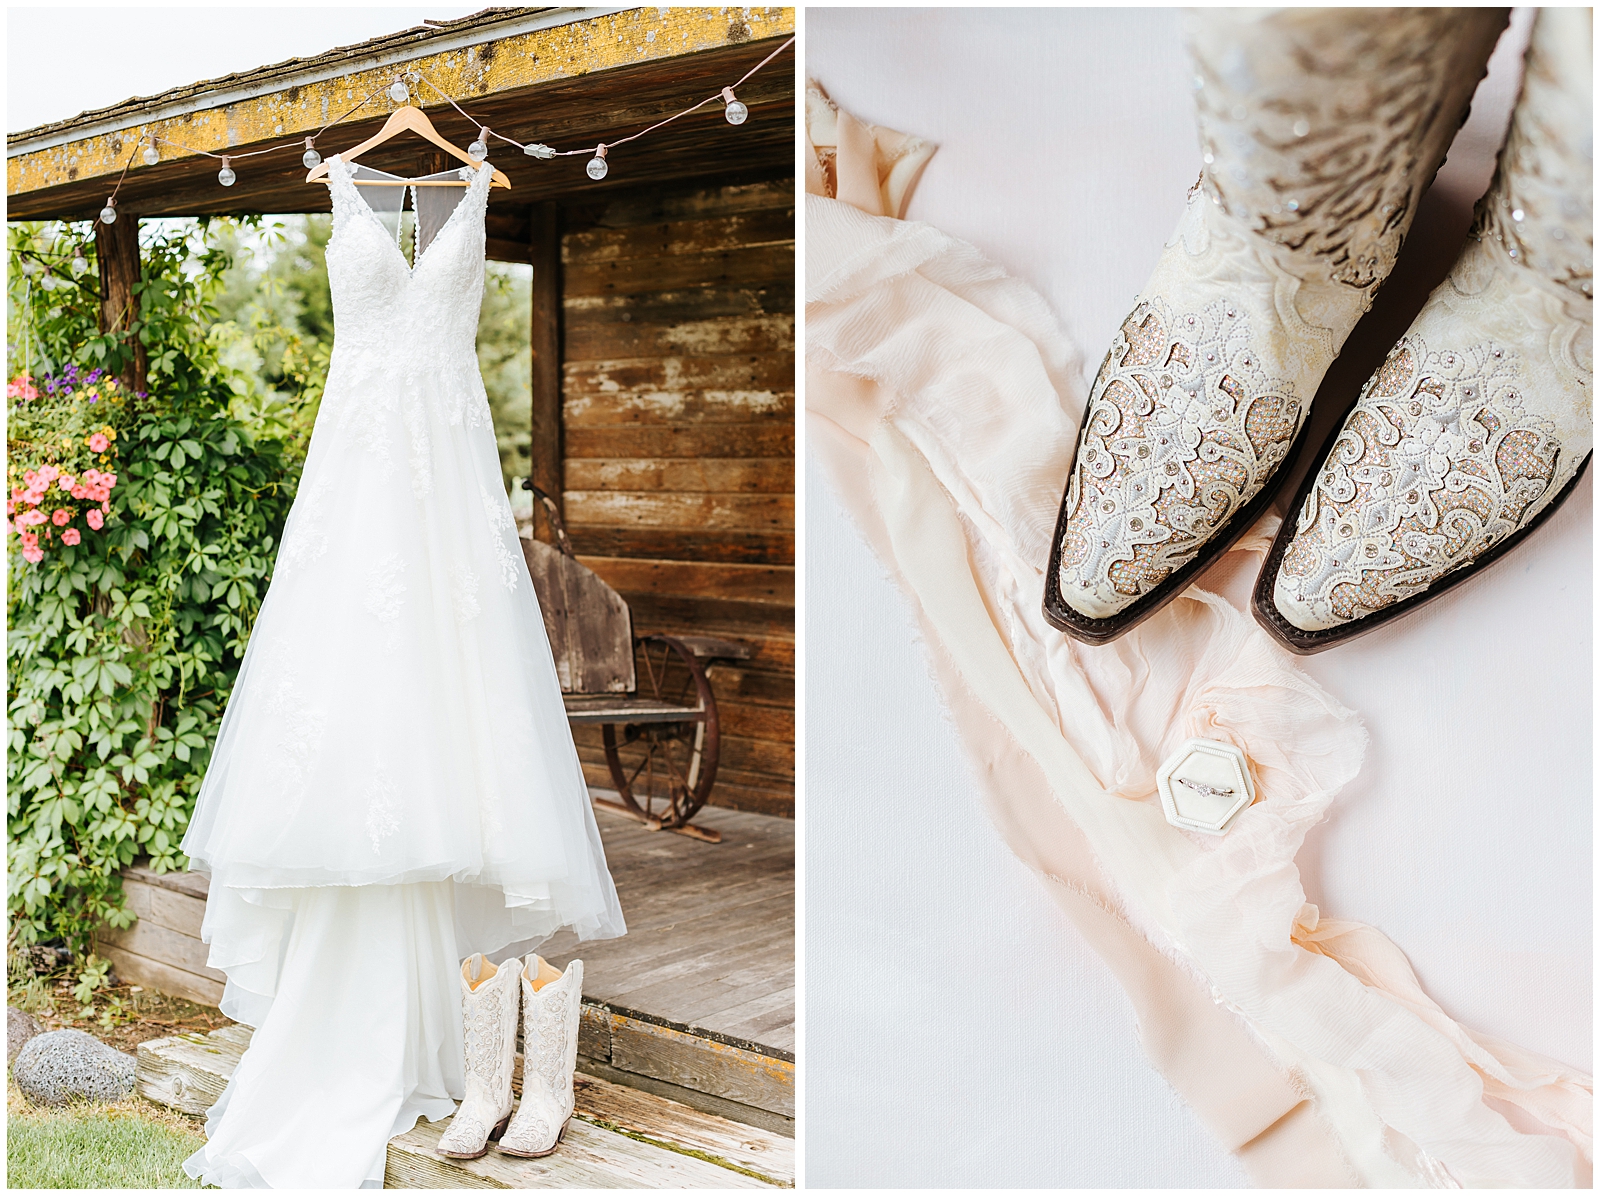 Rustic Chic Still Water Hollow Wedding Dress hanging with Bridal Cowboy Boots